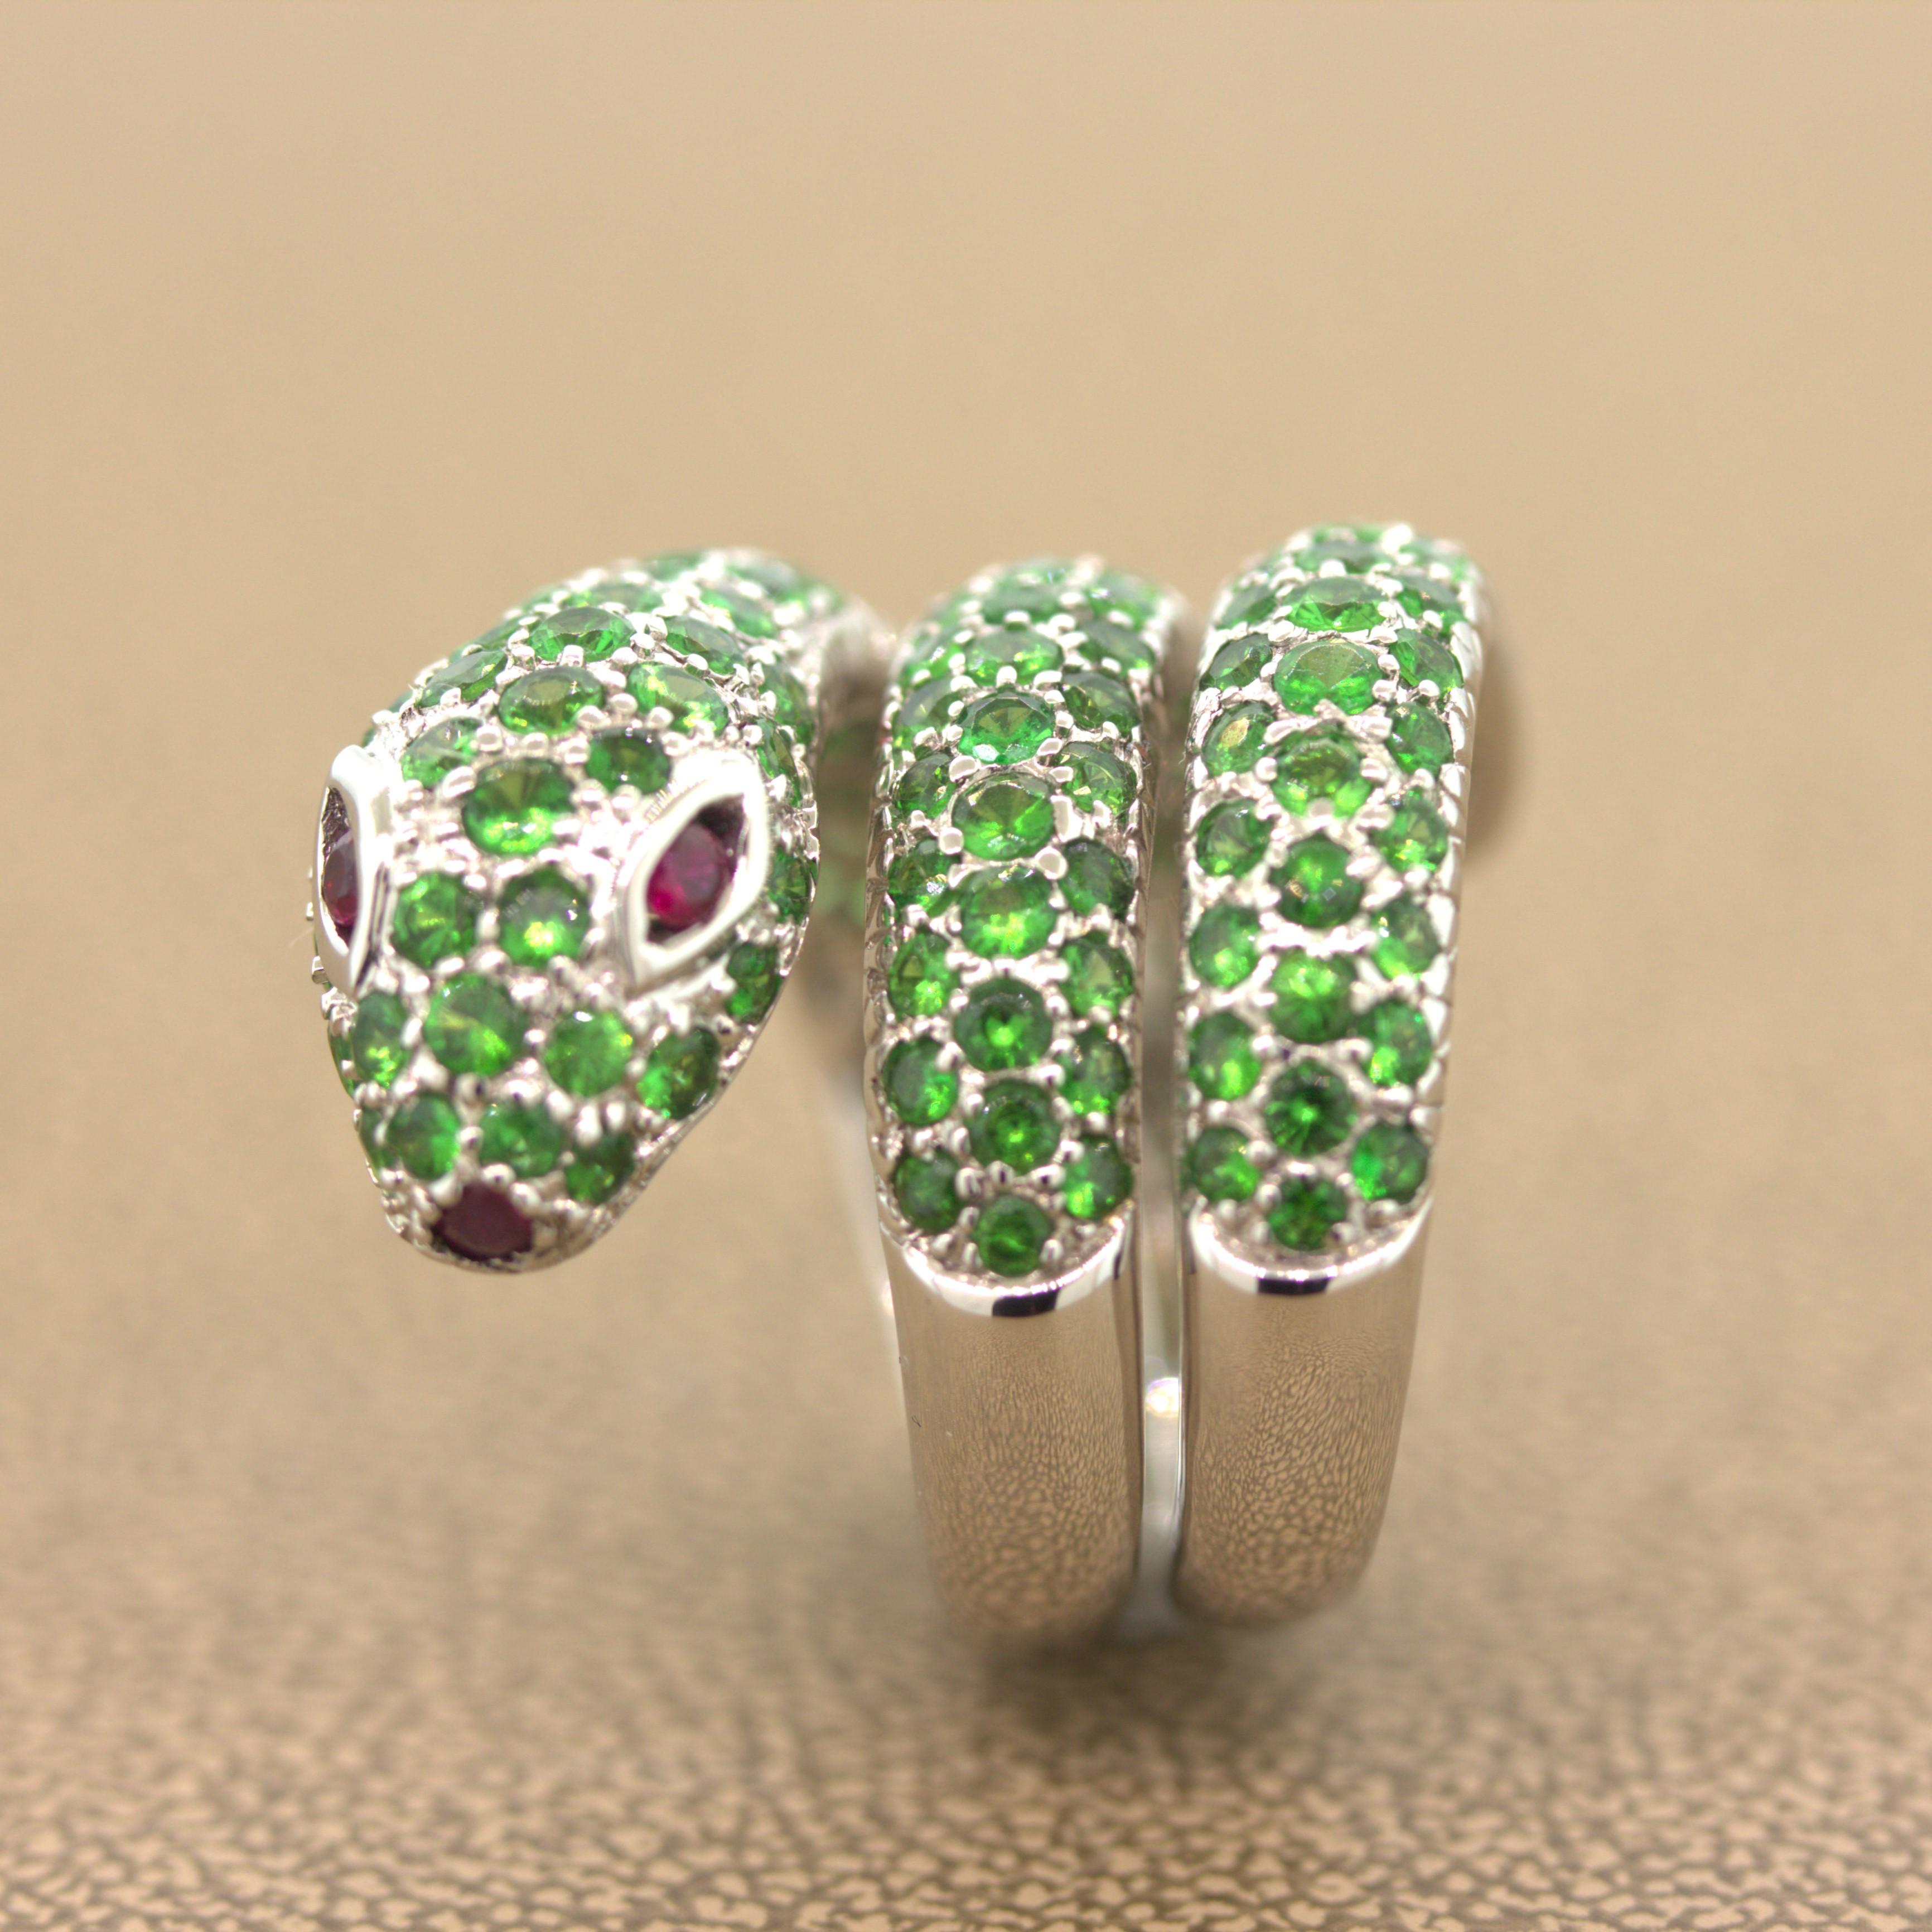 A sleek and sexy snake blanketed with 3.90 carats of bright green tsavorite garnets. The snake wraps around the finger 3 times for a chic look. Its eyes and mouth are set with vivid red rubies giving it a sharp gaze. Made in 18k white gold, this